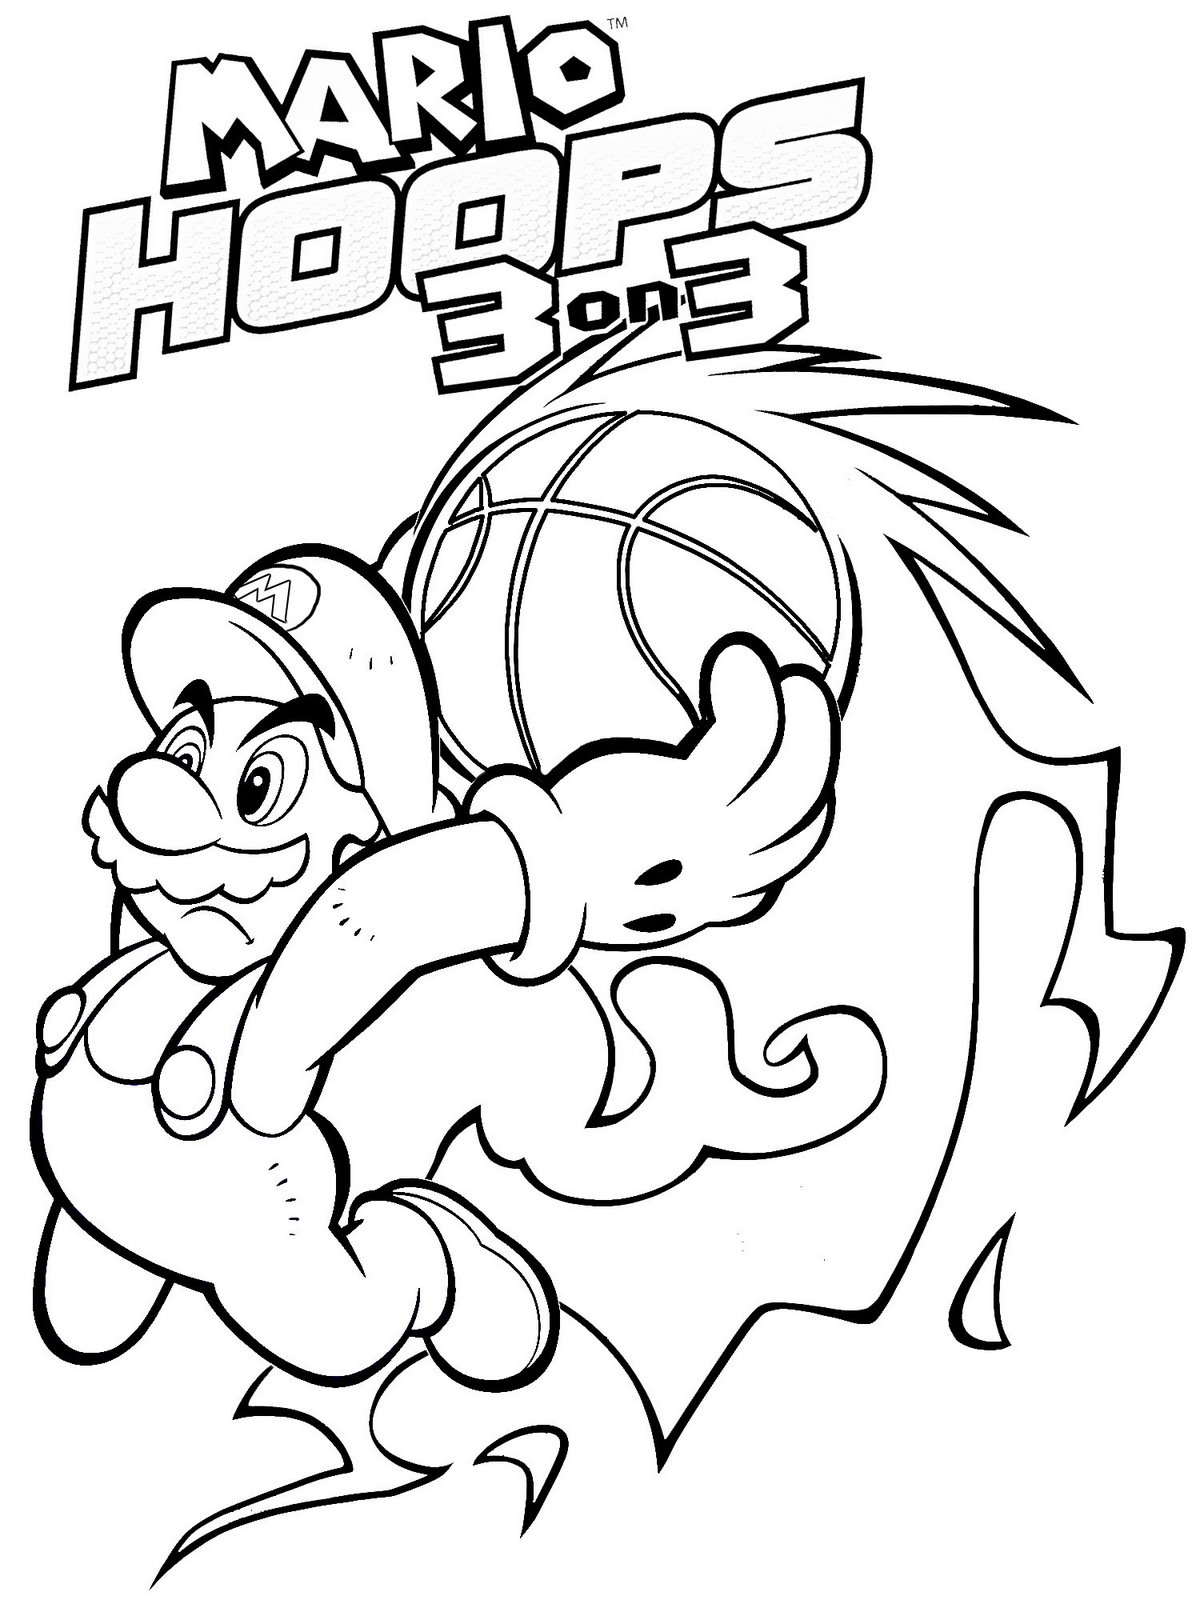 Download Super Mario Coloring Pages (2) - Coloring Kids